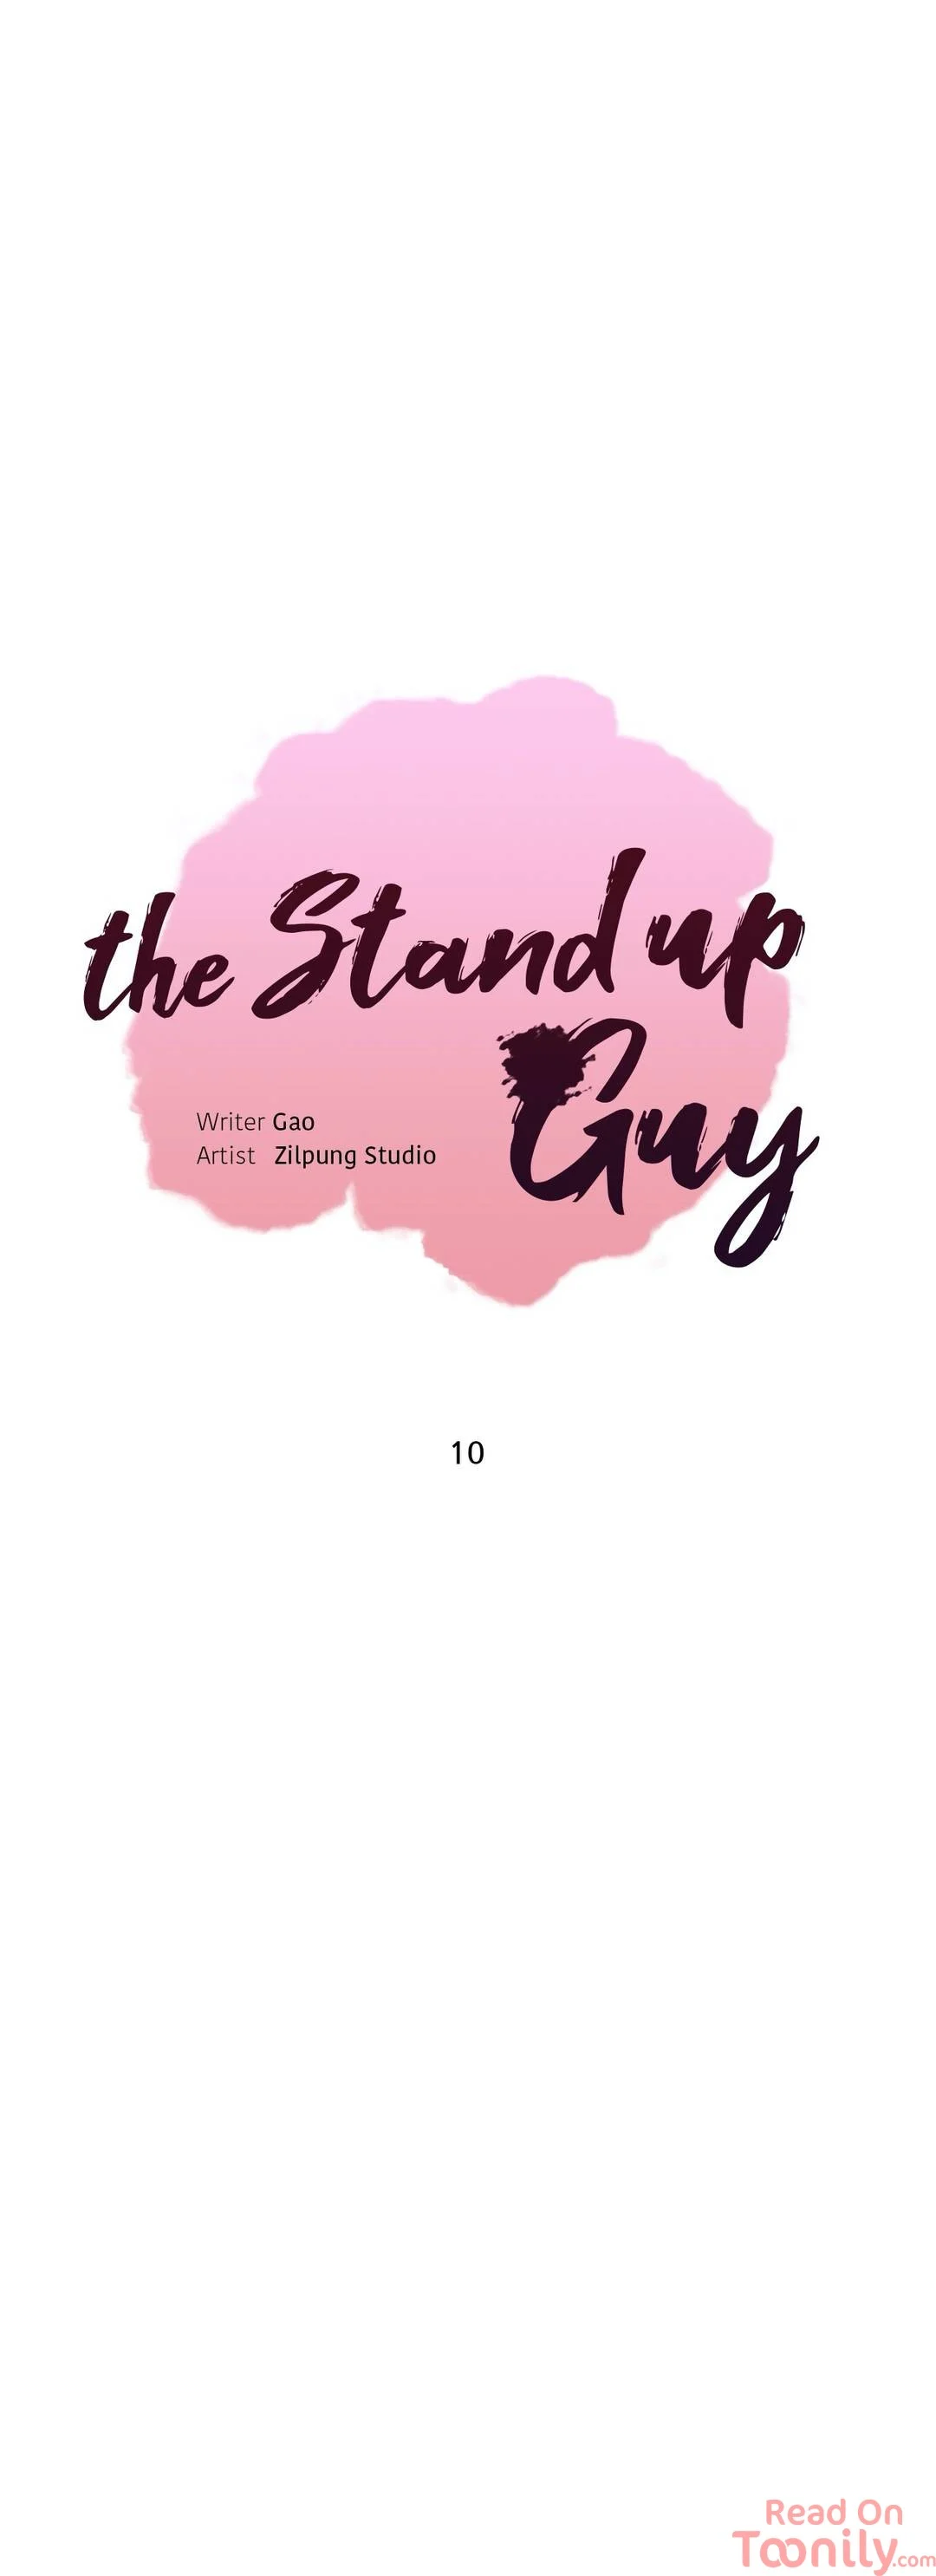 The Stand Up Guy image